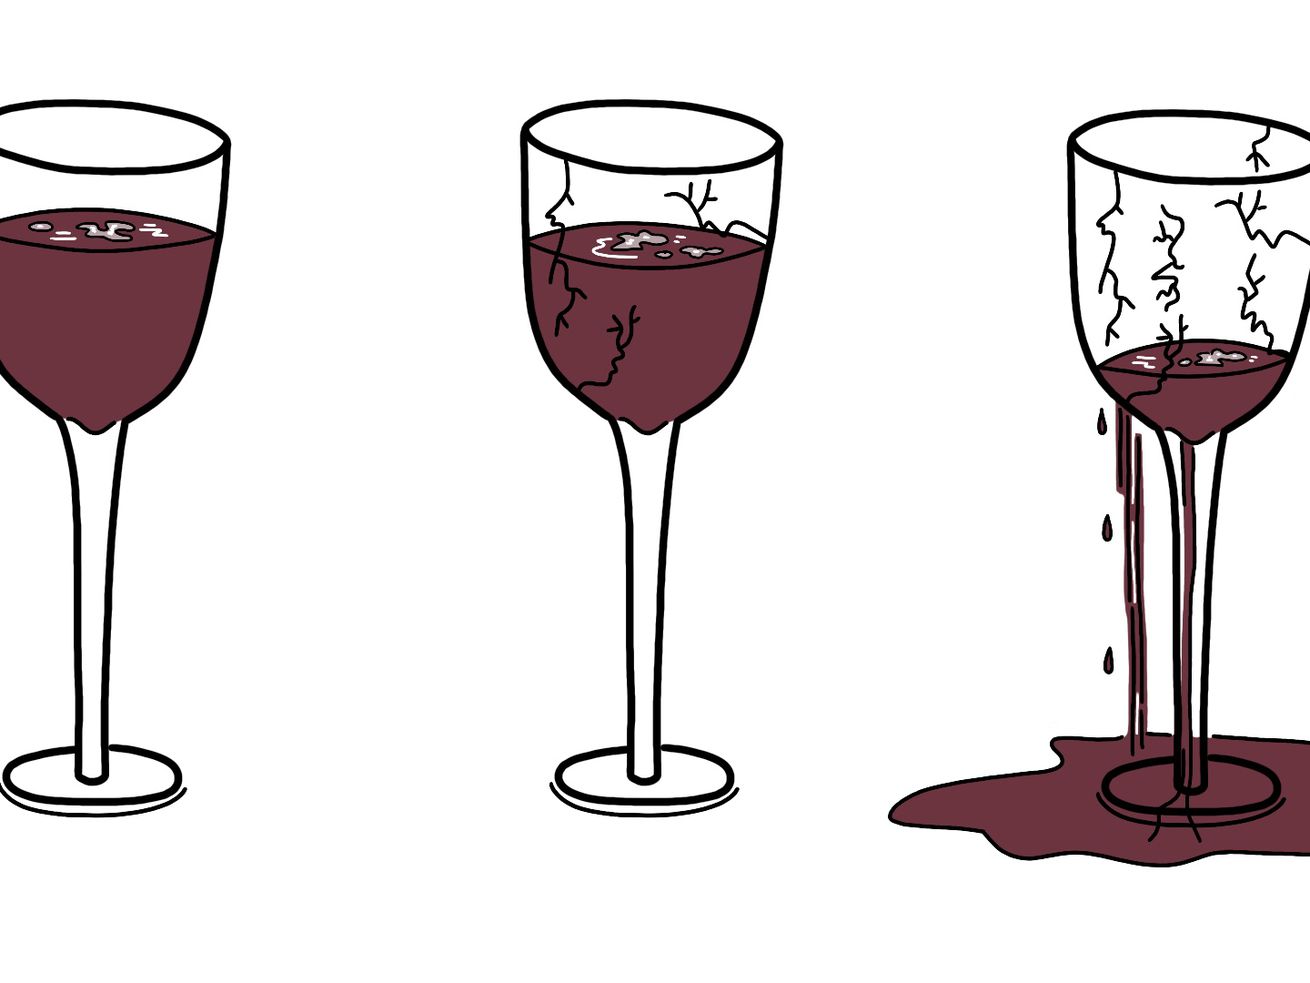 Three wine glasses: the first is intact, the second has some cracks, and the third is shattered with liquid draining out